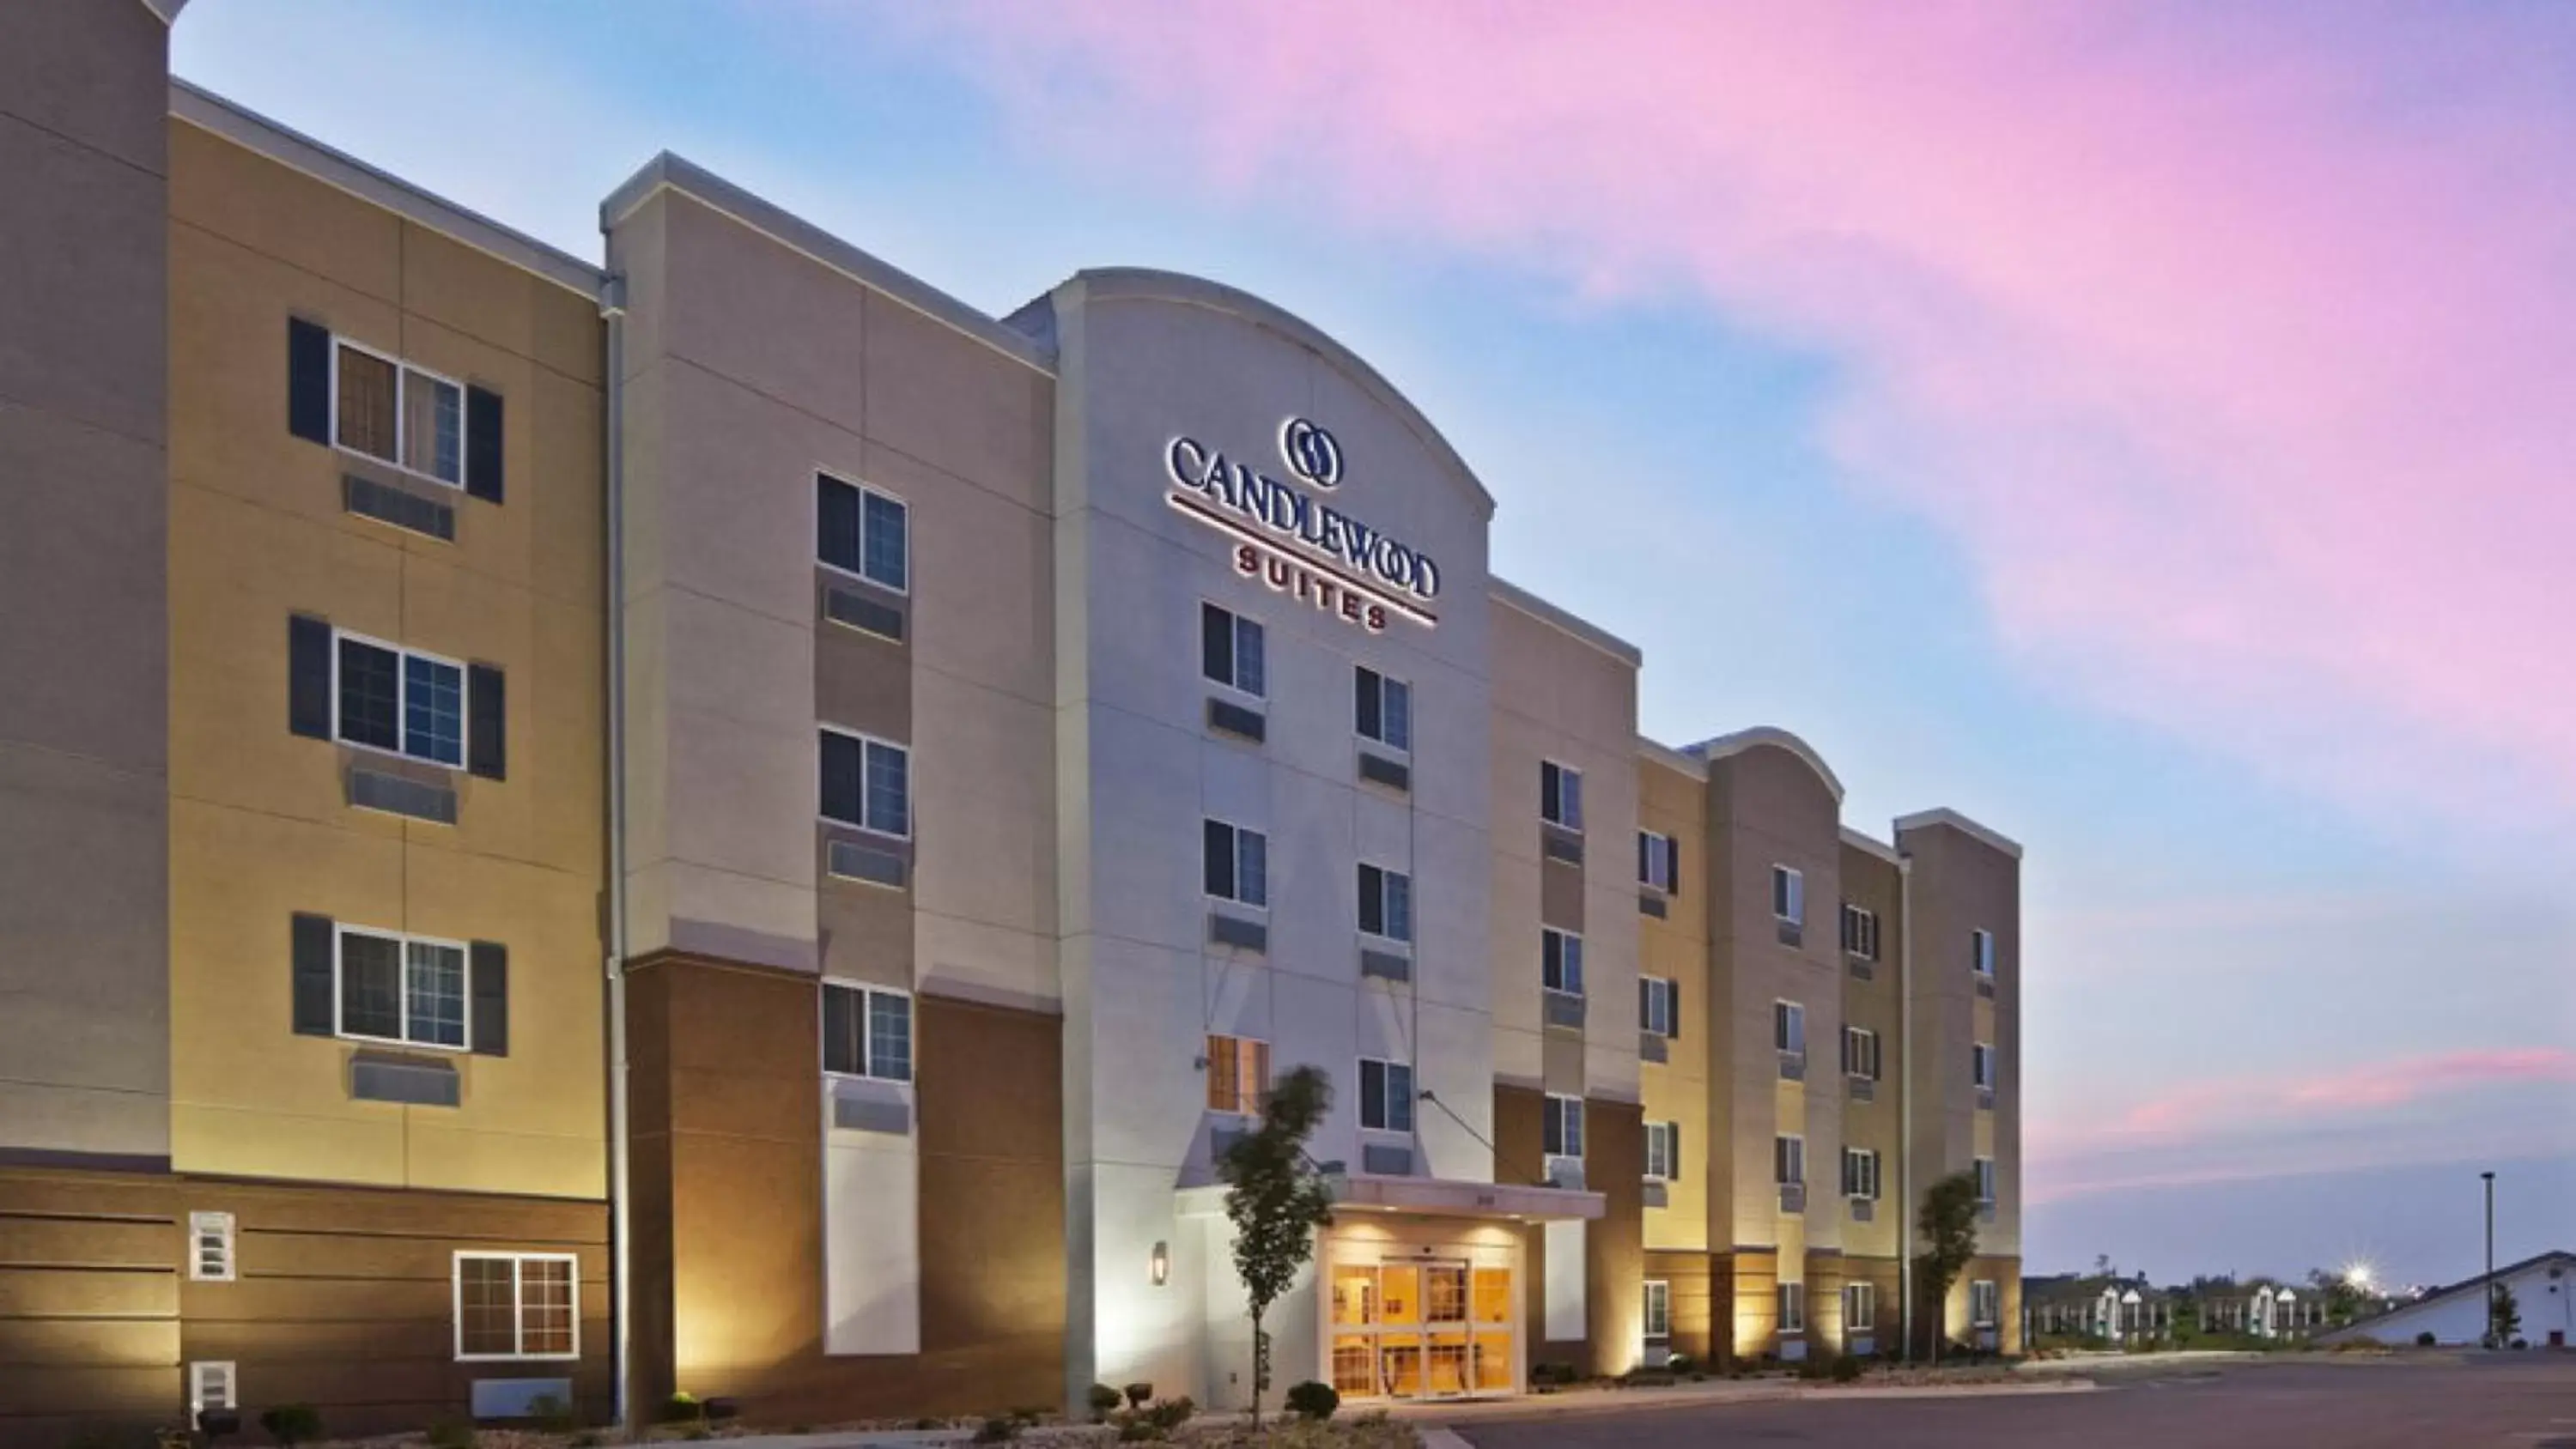 Property building in Candlewood Suites Midland, an IHG Hotel